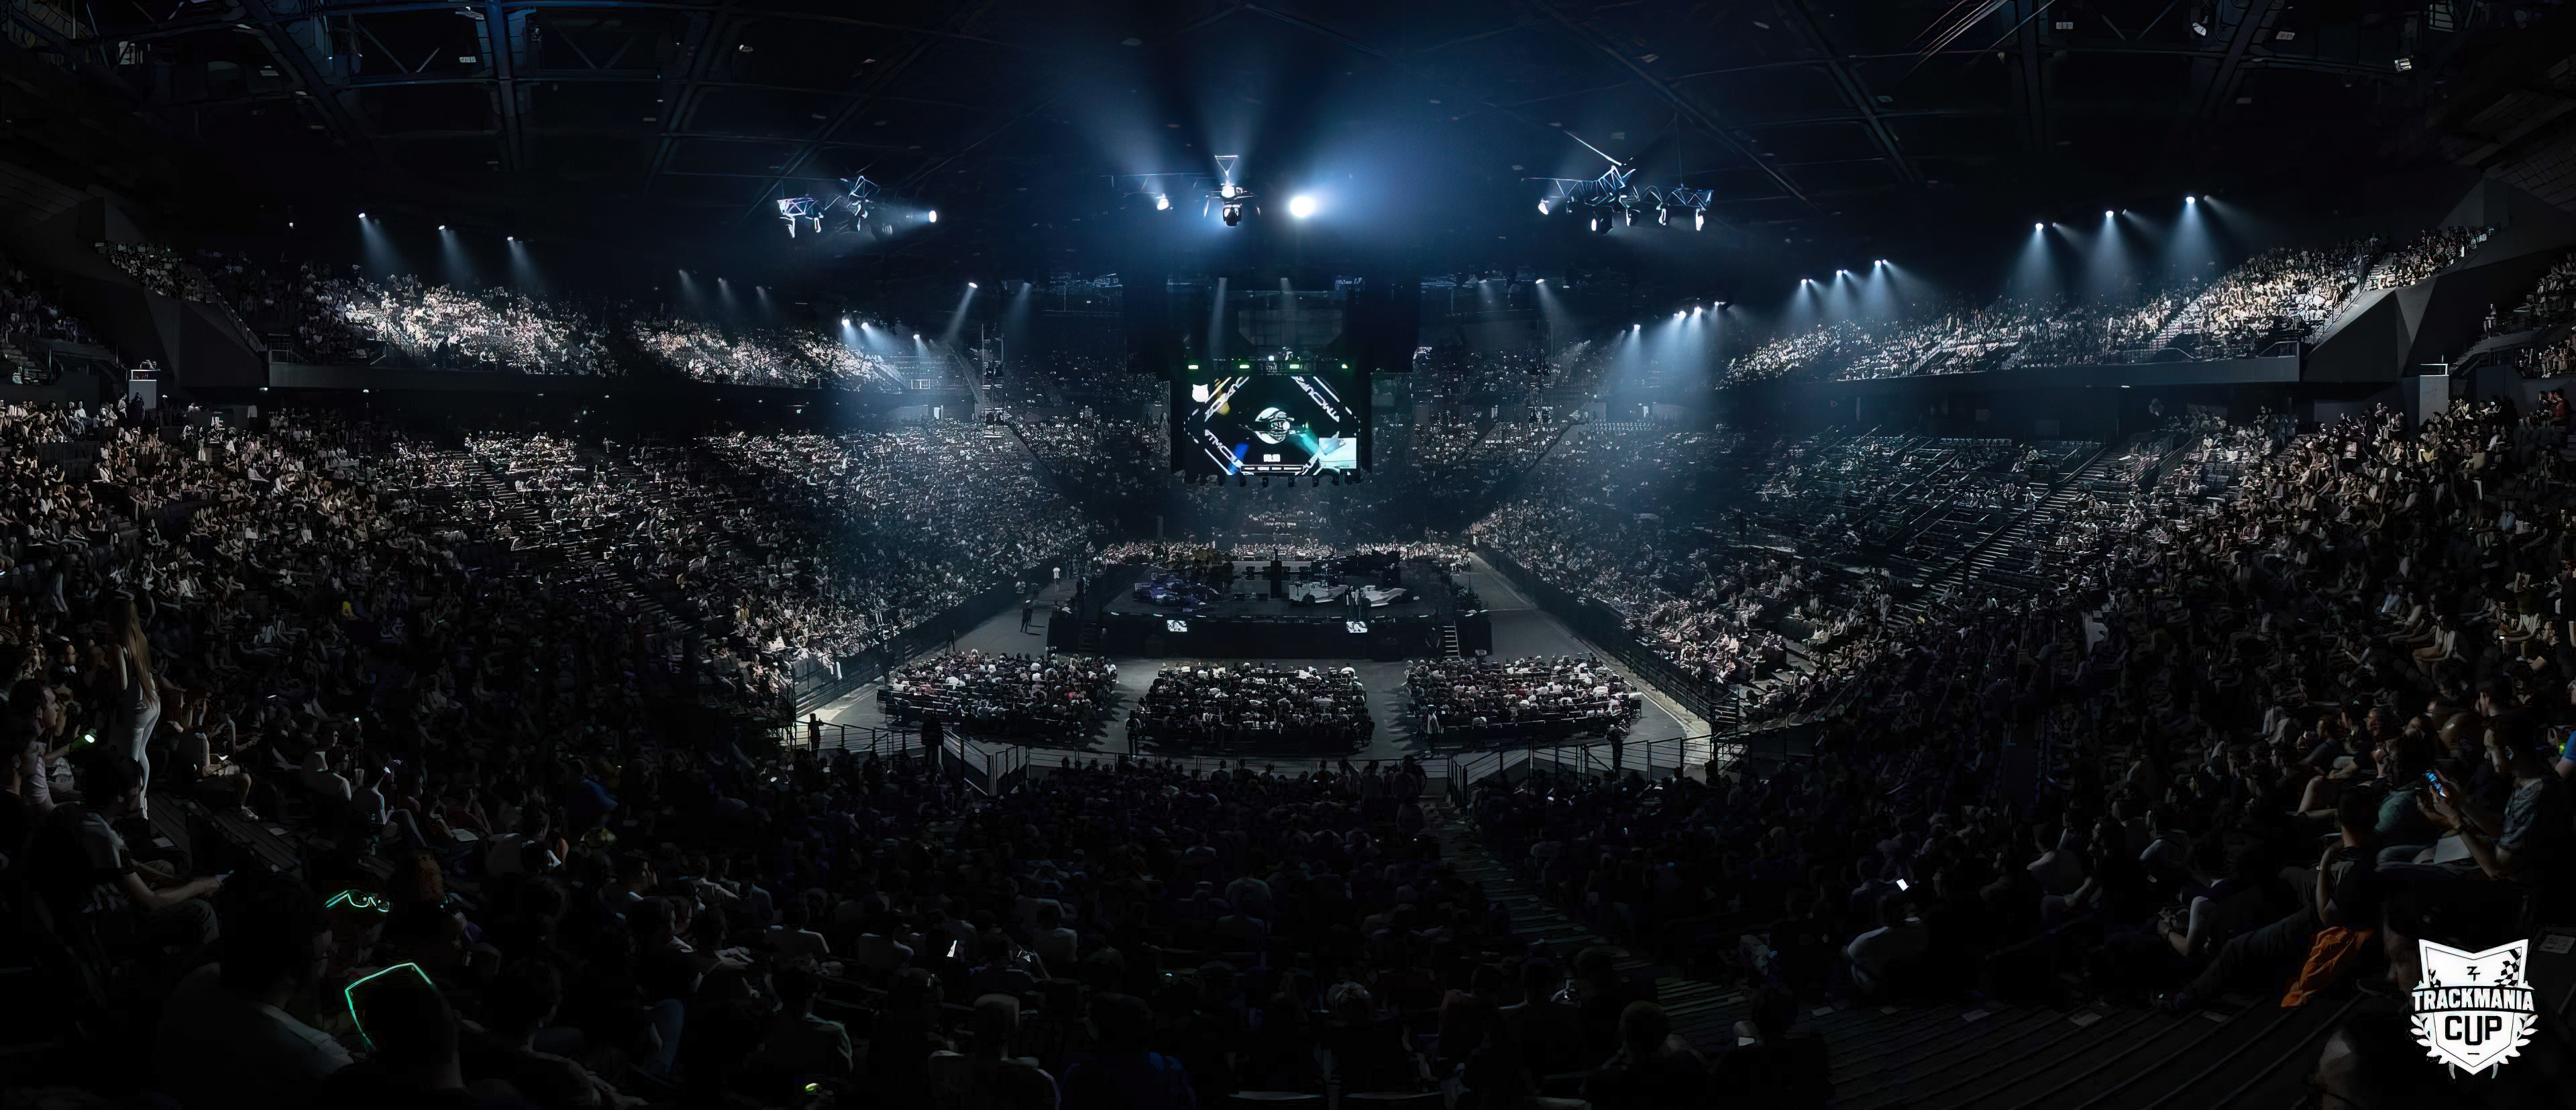 15.000 Real Spectators attended this event. While 1 Millions were online spectators. [Twitch]